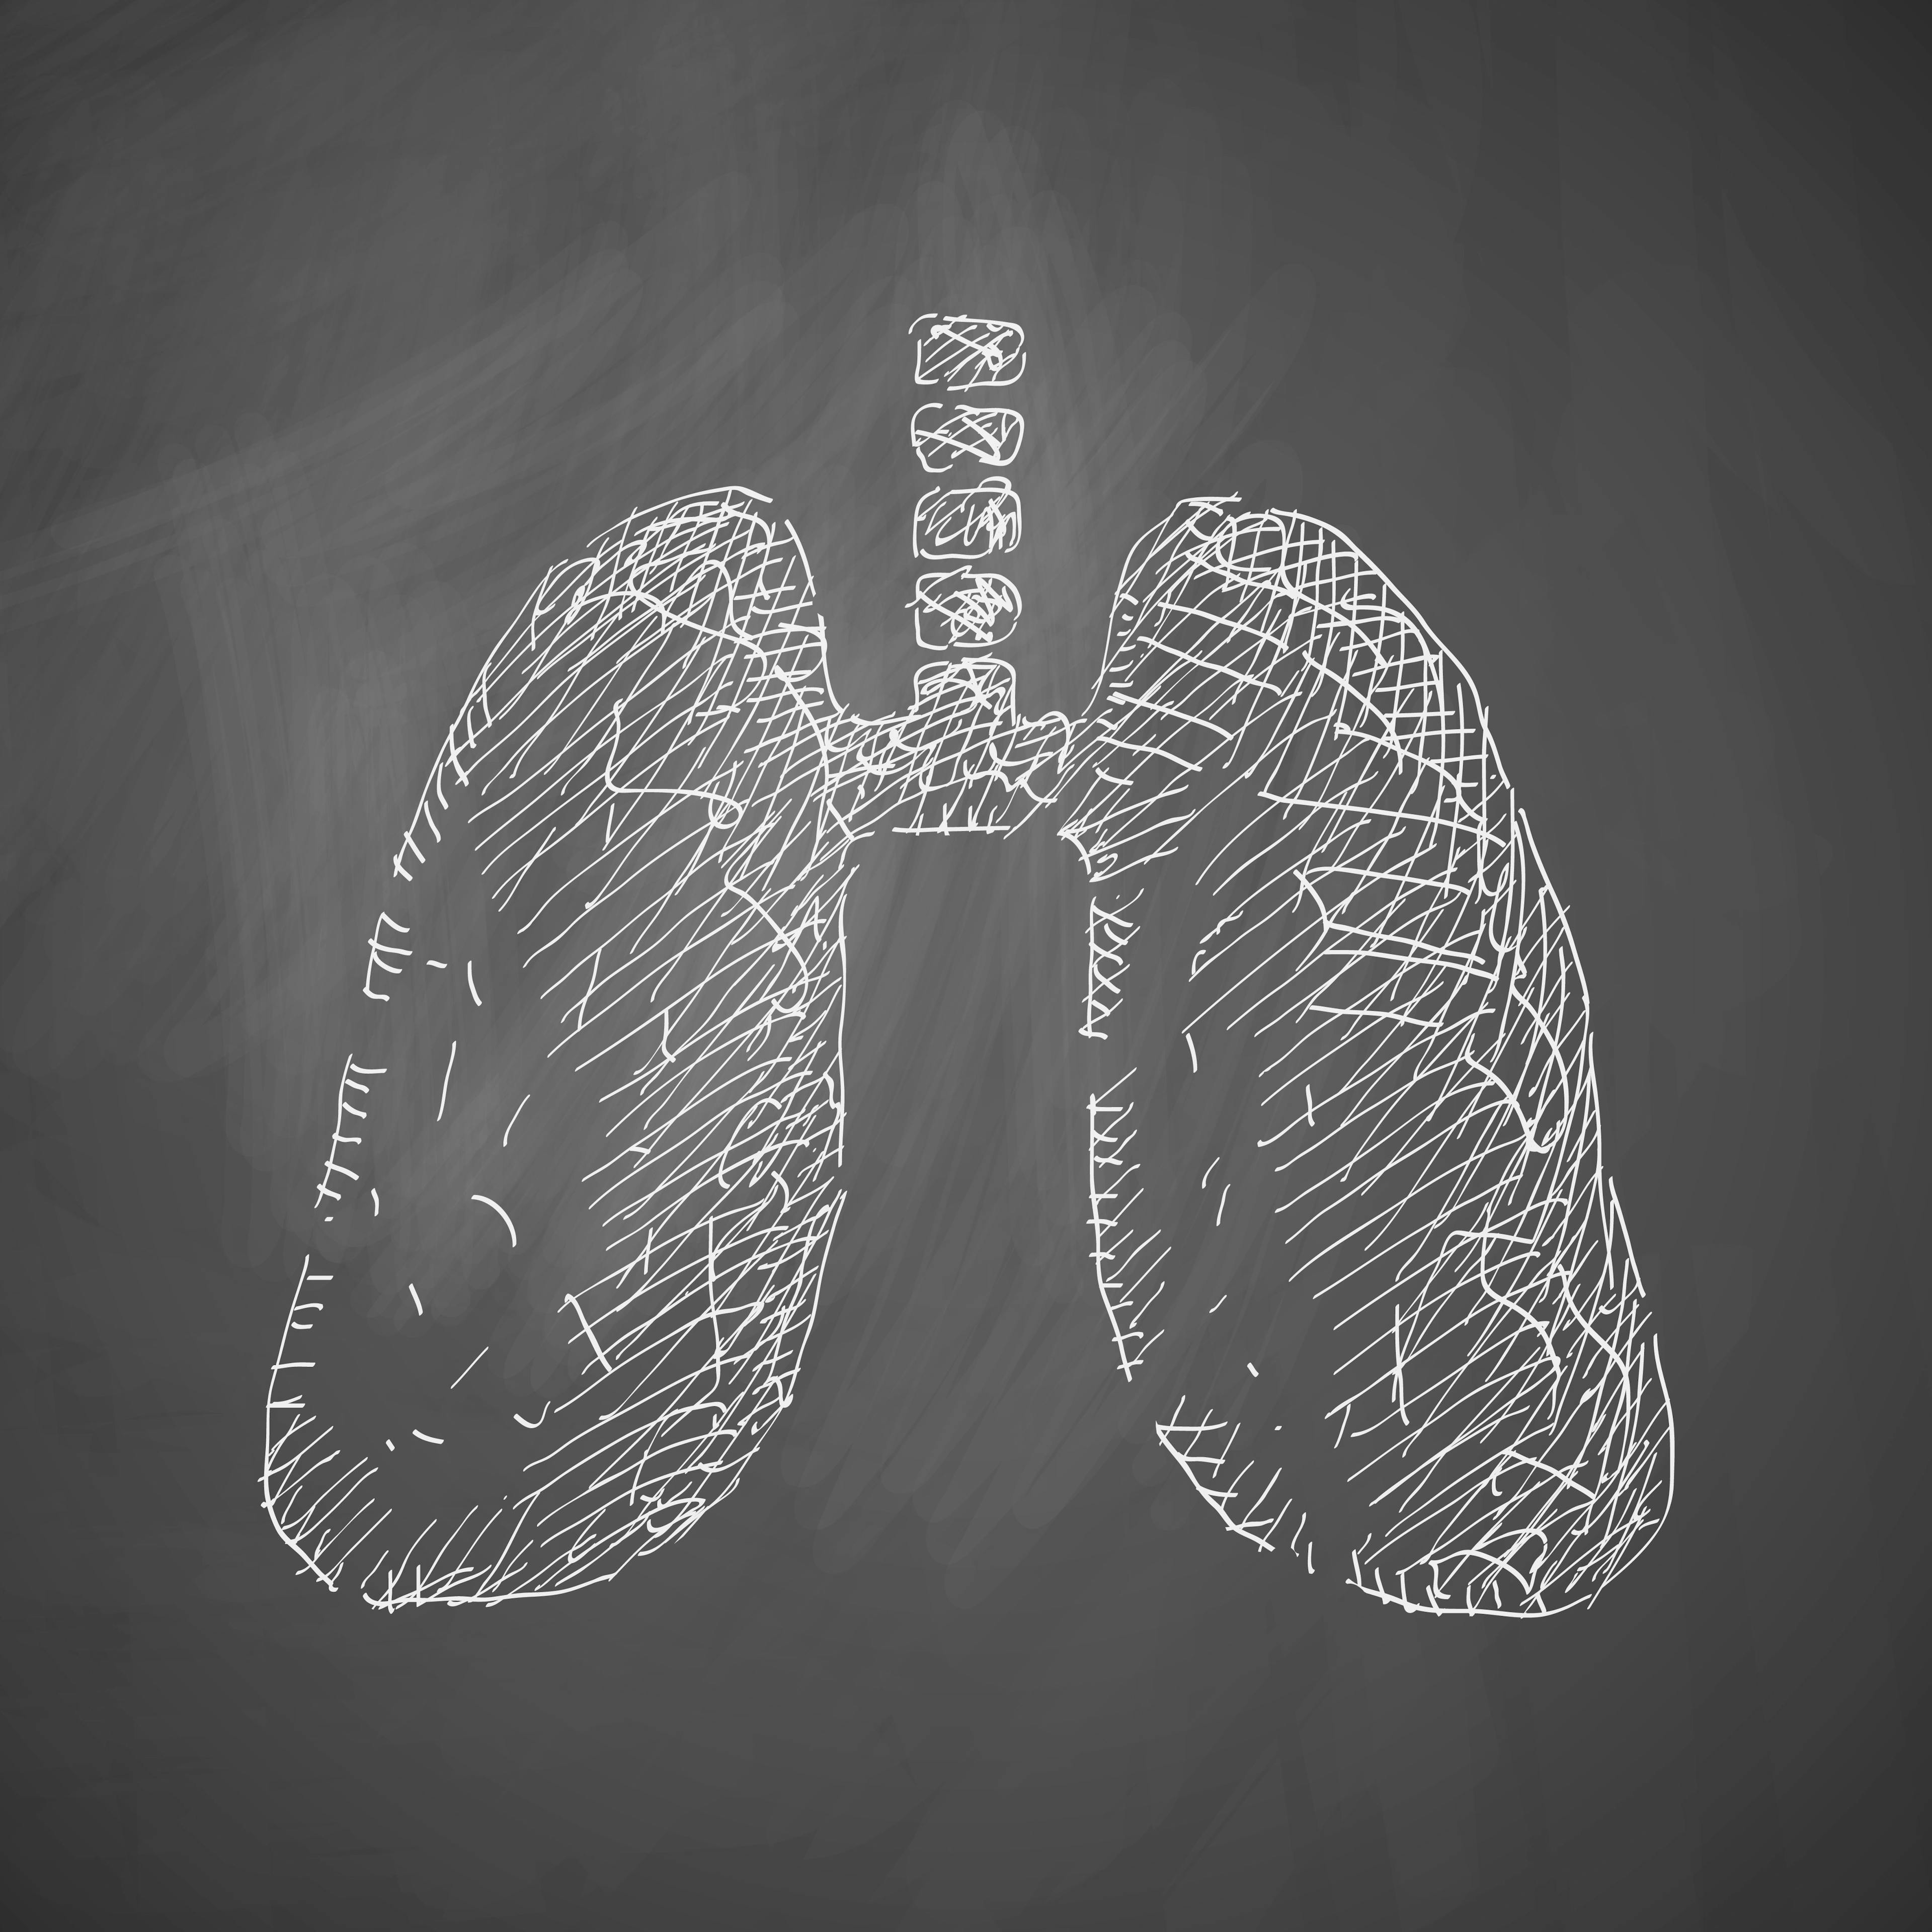 What Are the Factors Predicting Mortality in Patients Using NIV for COPD?